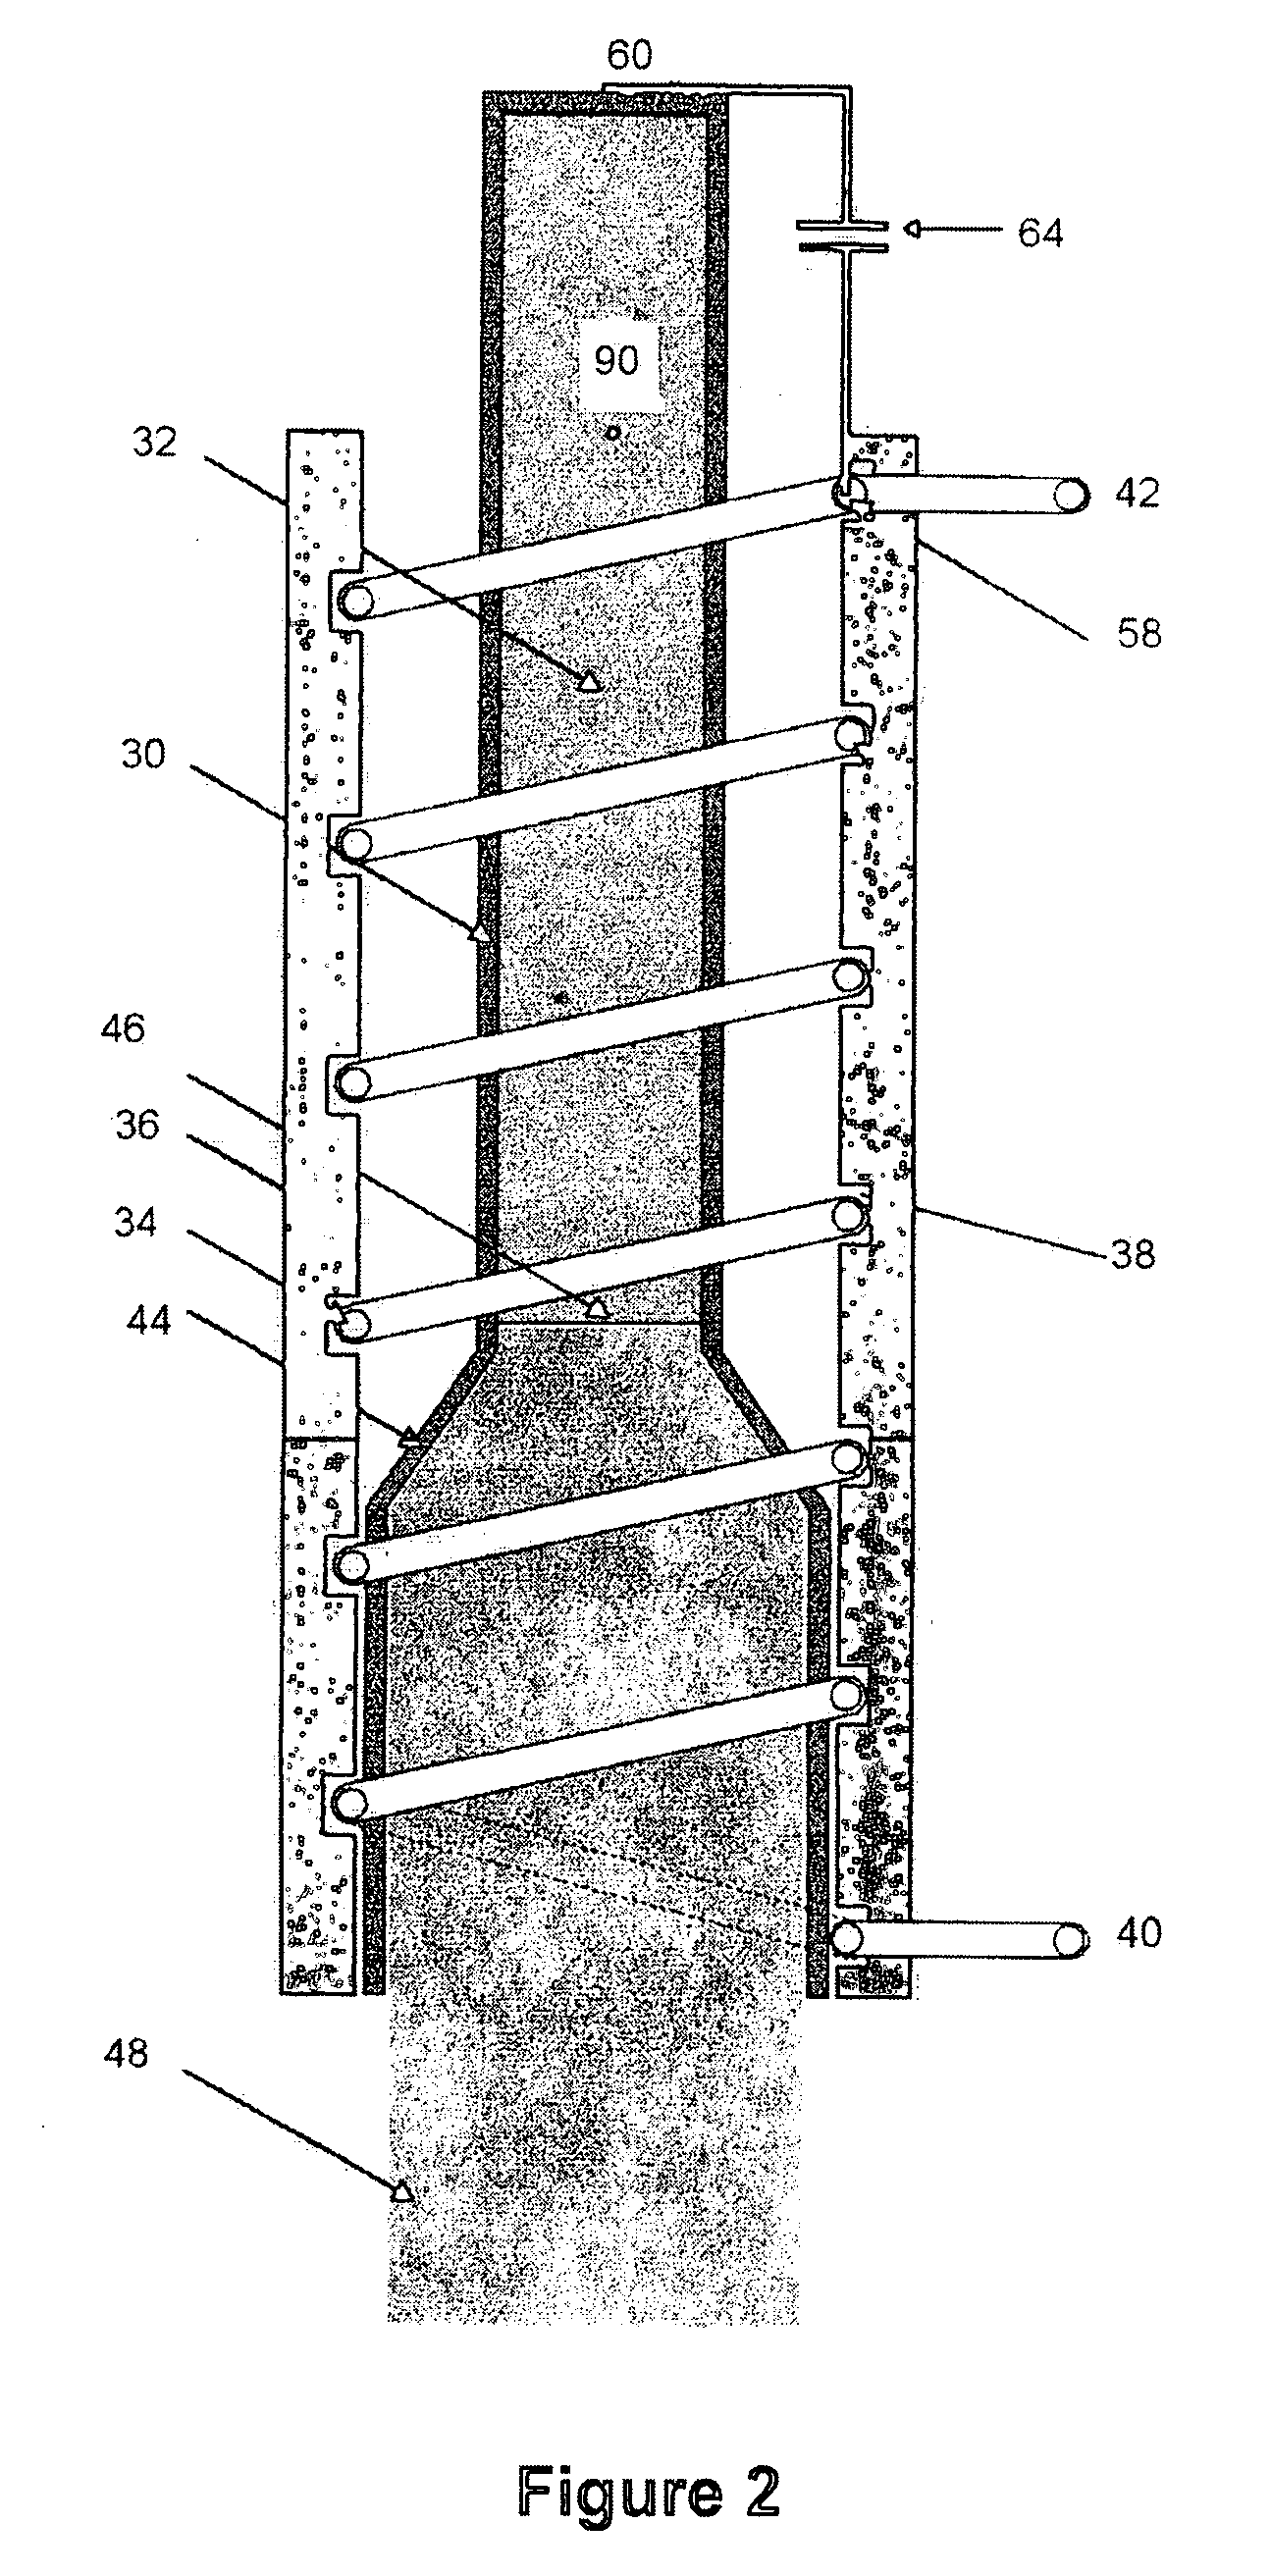 Explosively driven radio frequency pulse generating apparatus